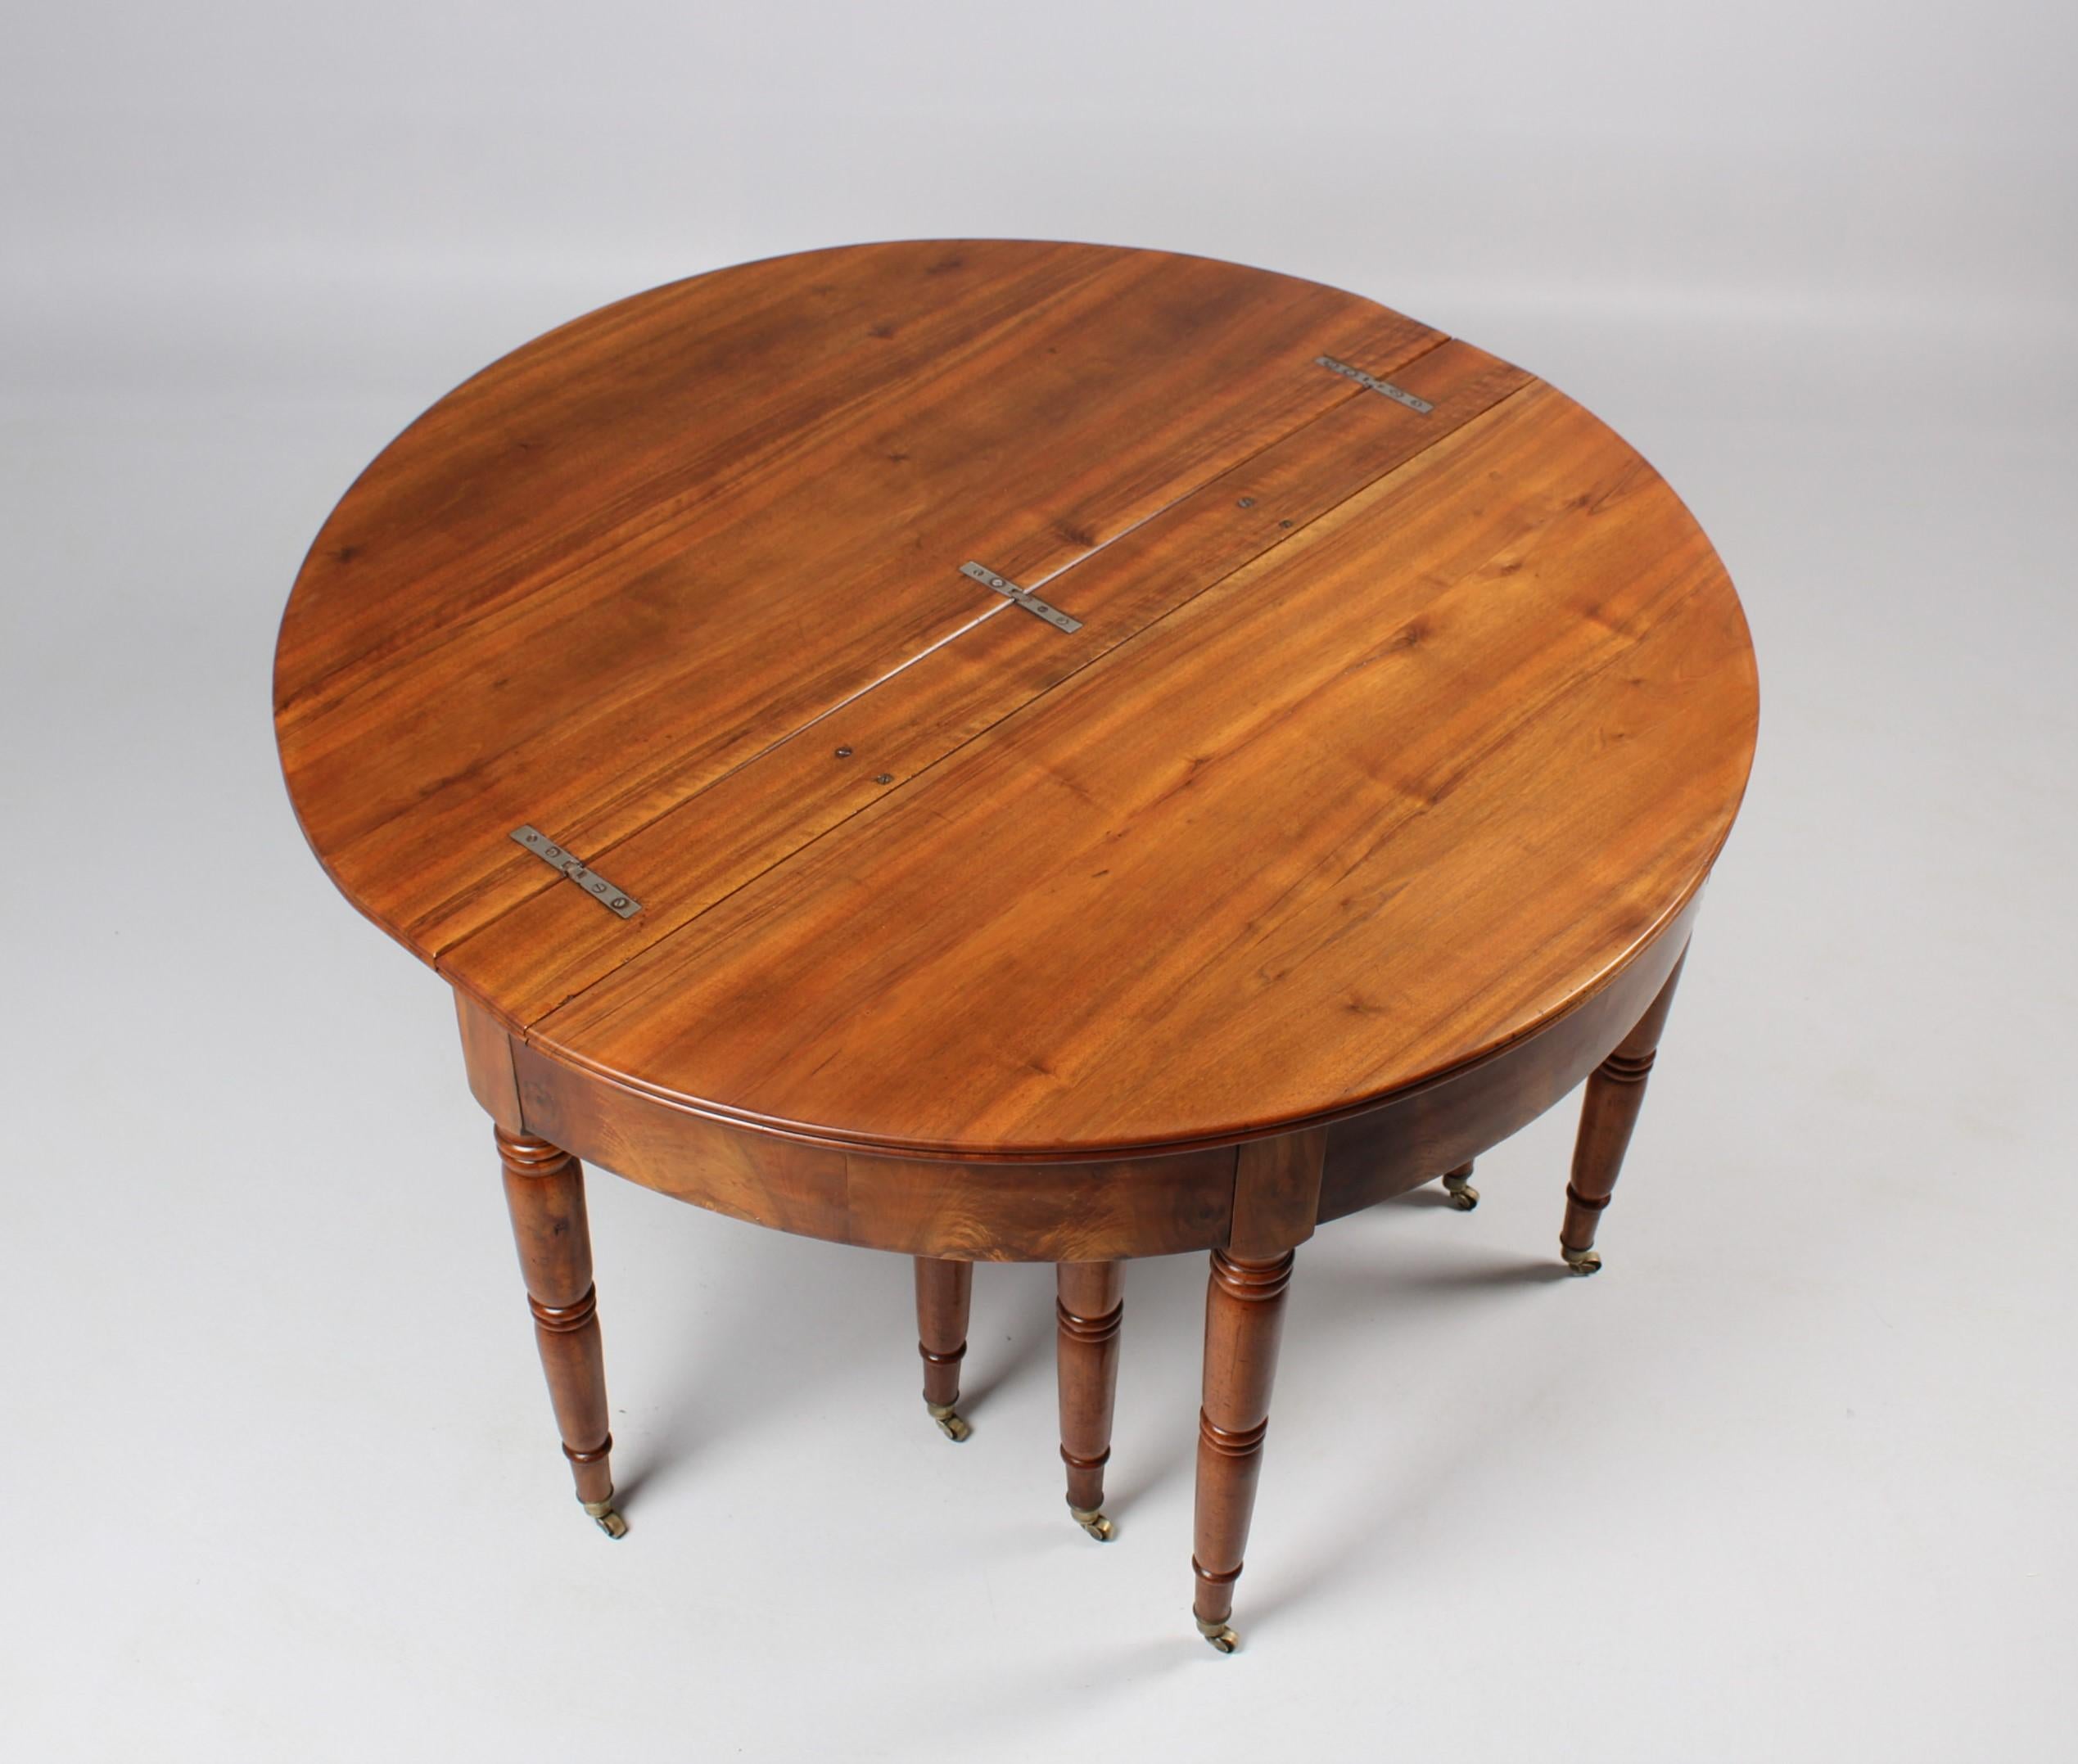 Large 19th Century Dining Table, Walnut, 12-16 People 11